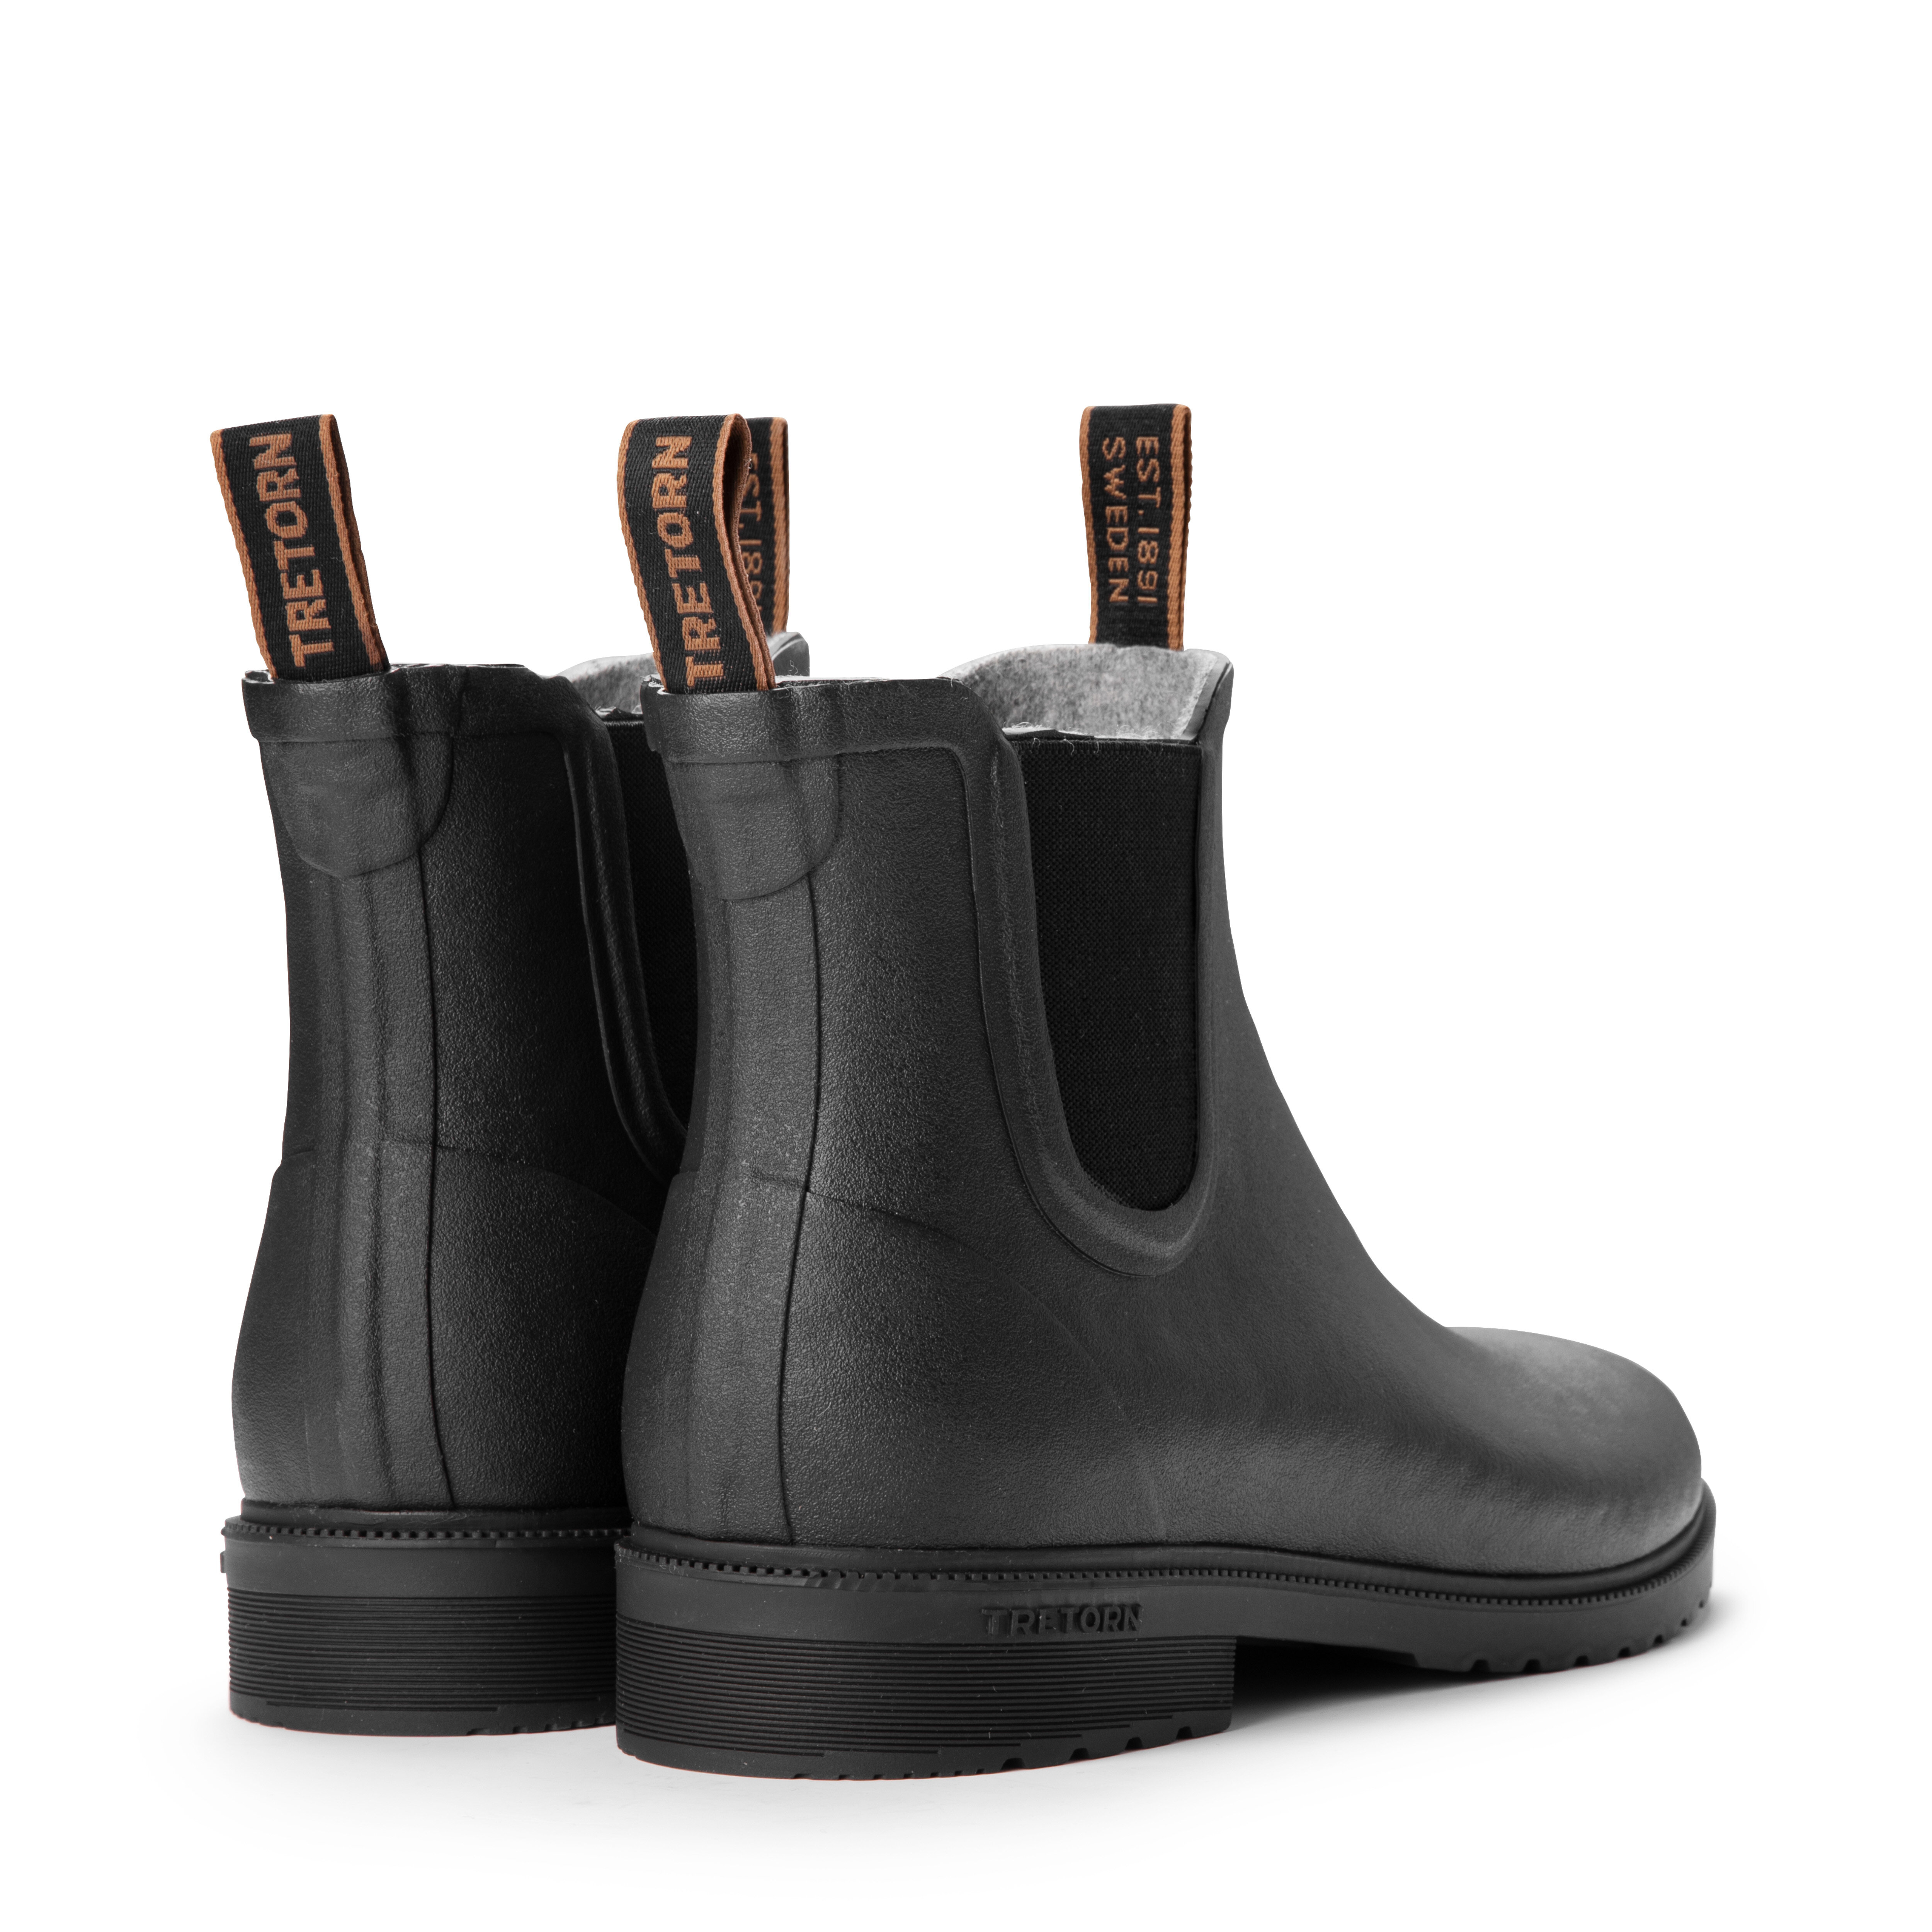 CHELSEA CLASSIC WOOL RUBBER BOOT